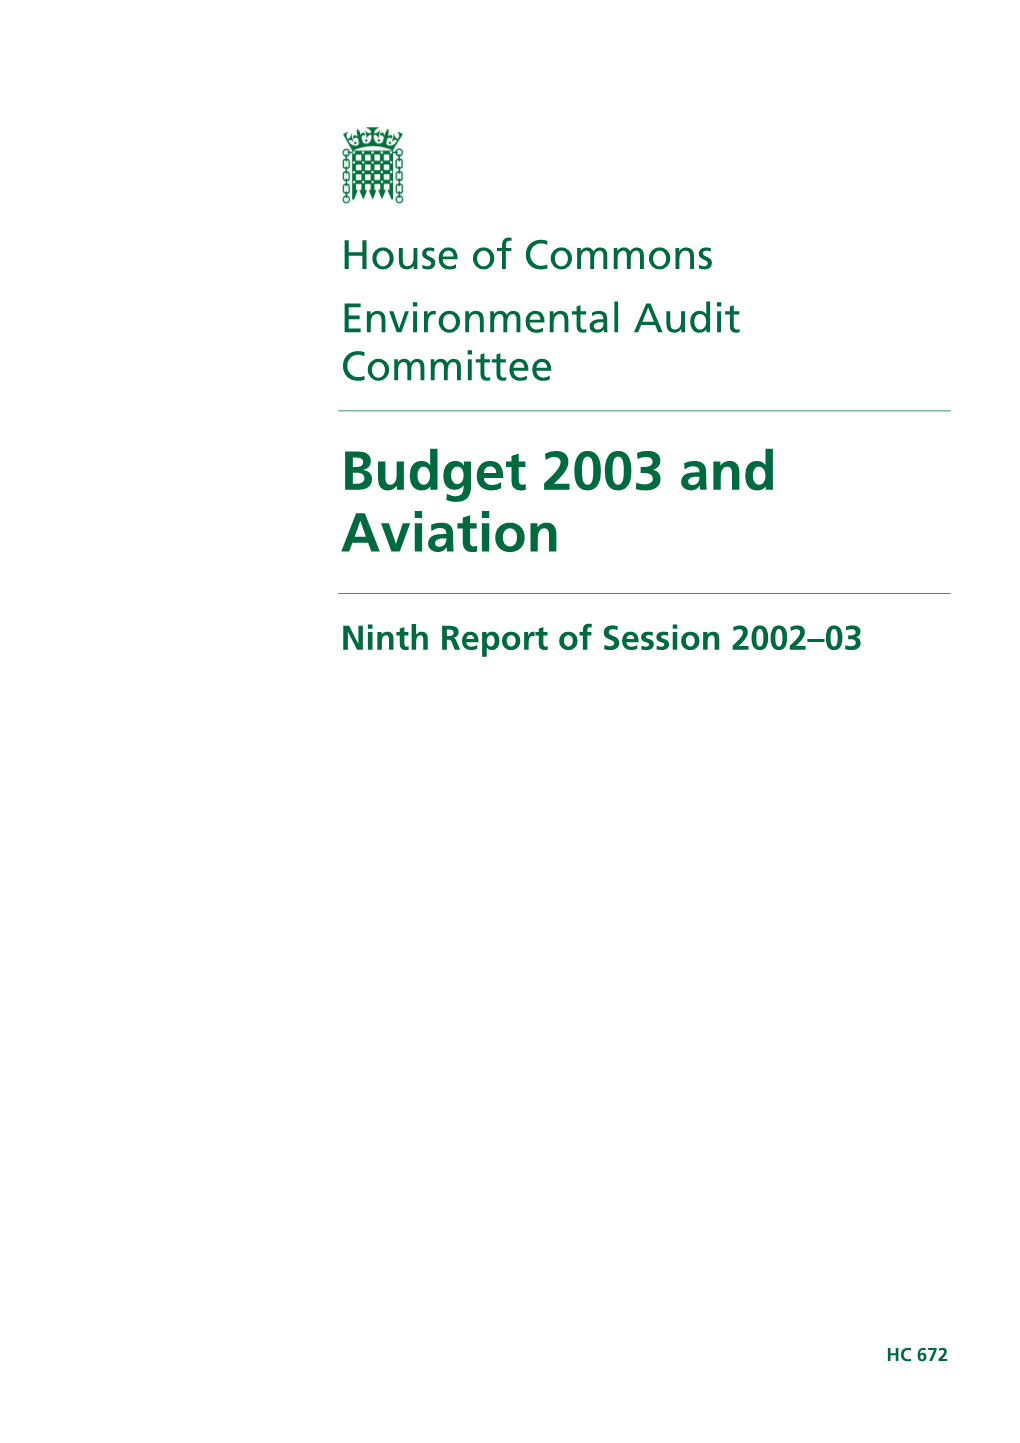 Budget 2003 and Aviation